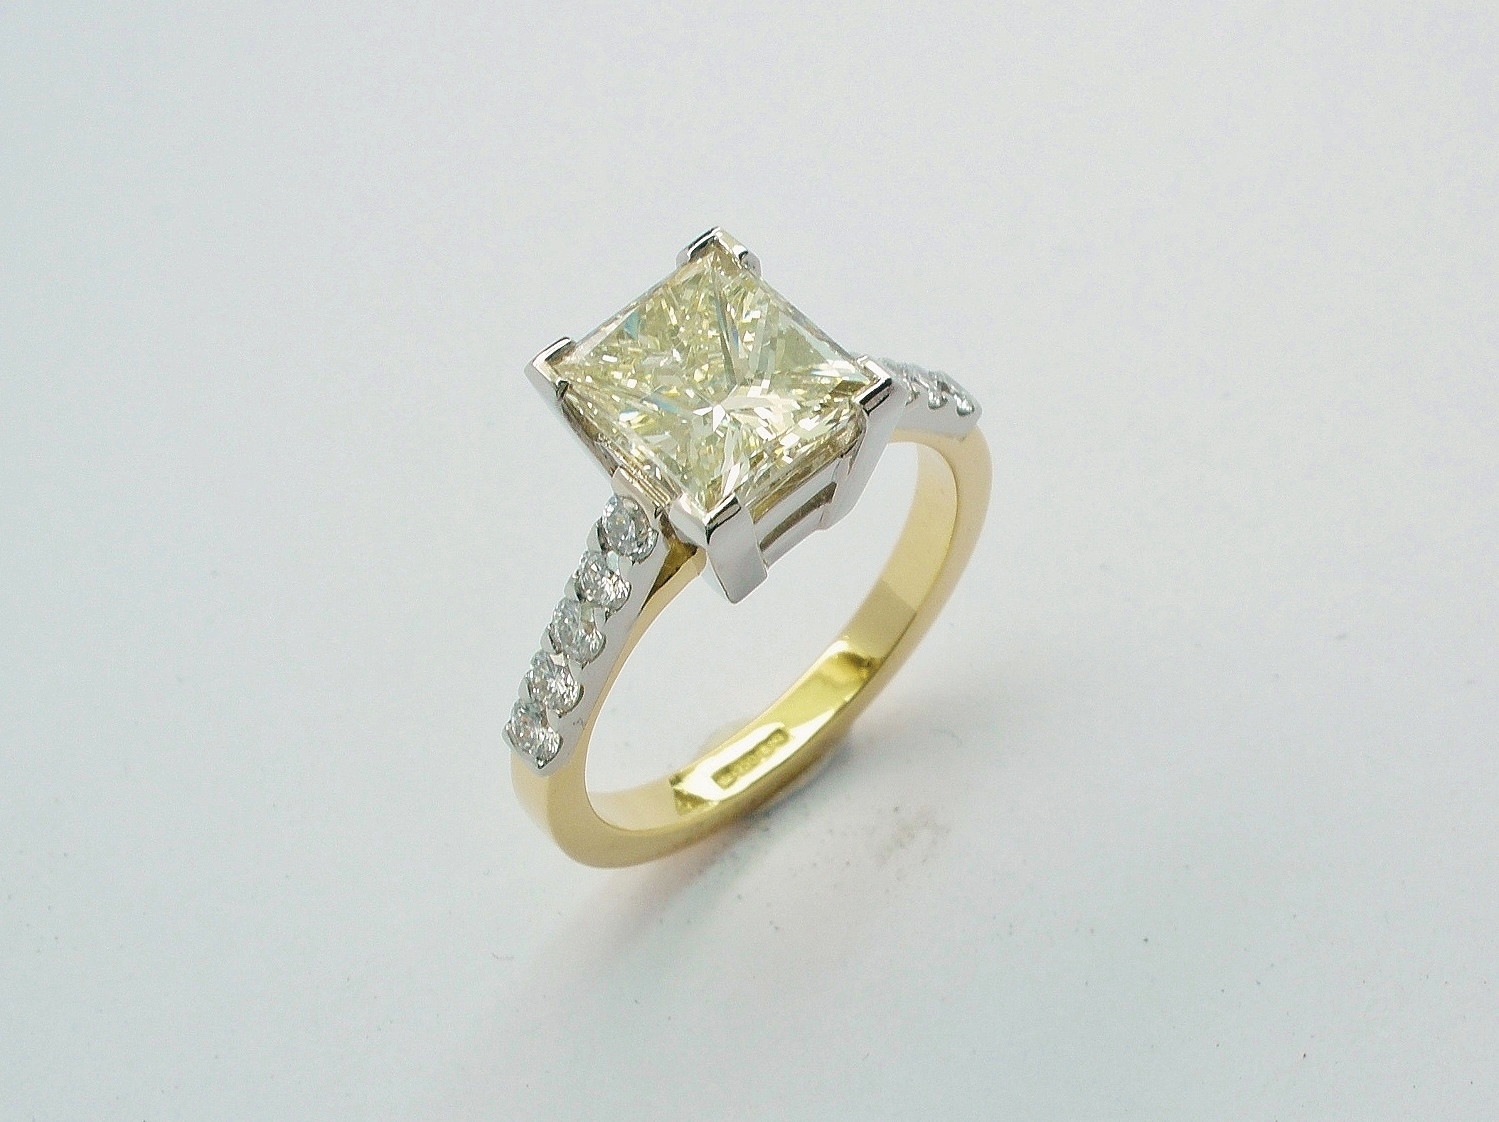 Champagne coloured Princess cut 2.01ct. diamond ring mounted in 18ct. yellow gold & platinum with 'D' coloured round brilliant cut diamonds in shoulders. Ideal diamond sizes 0.50ct to 4.00ct.